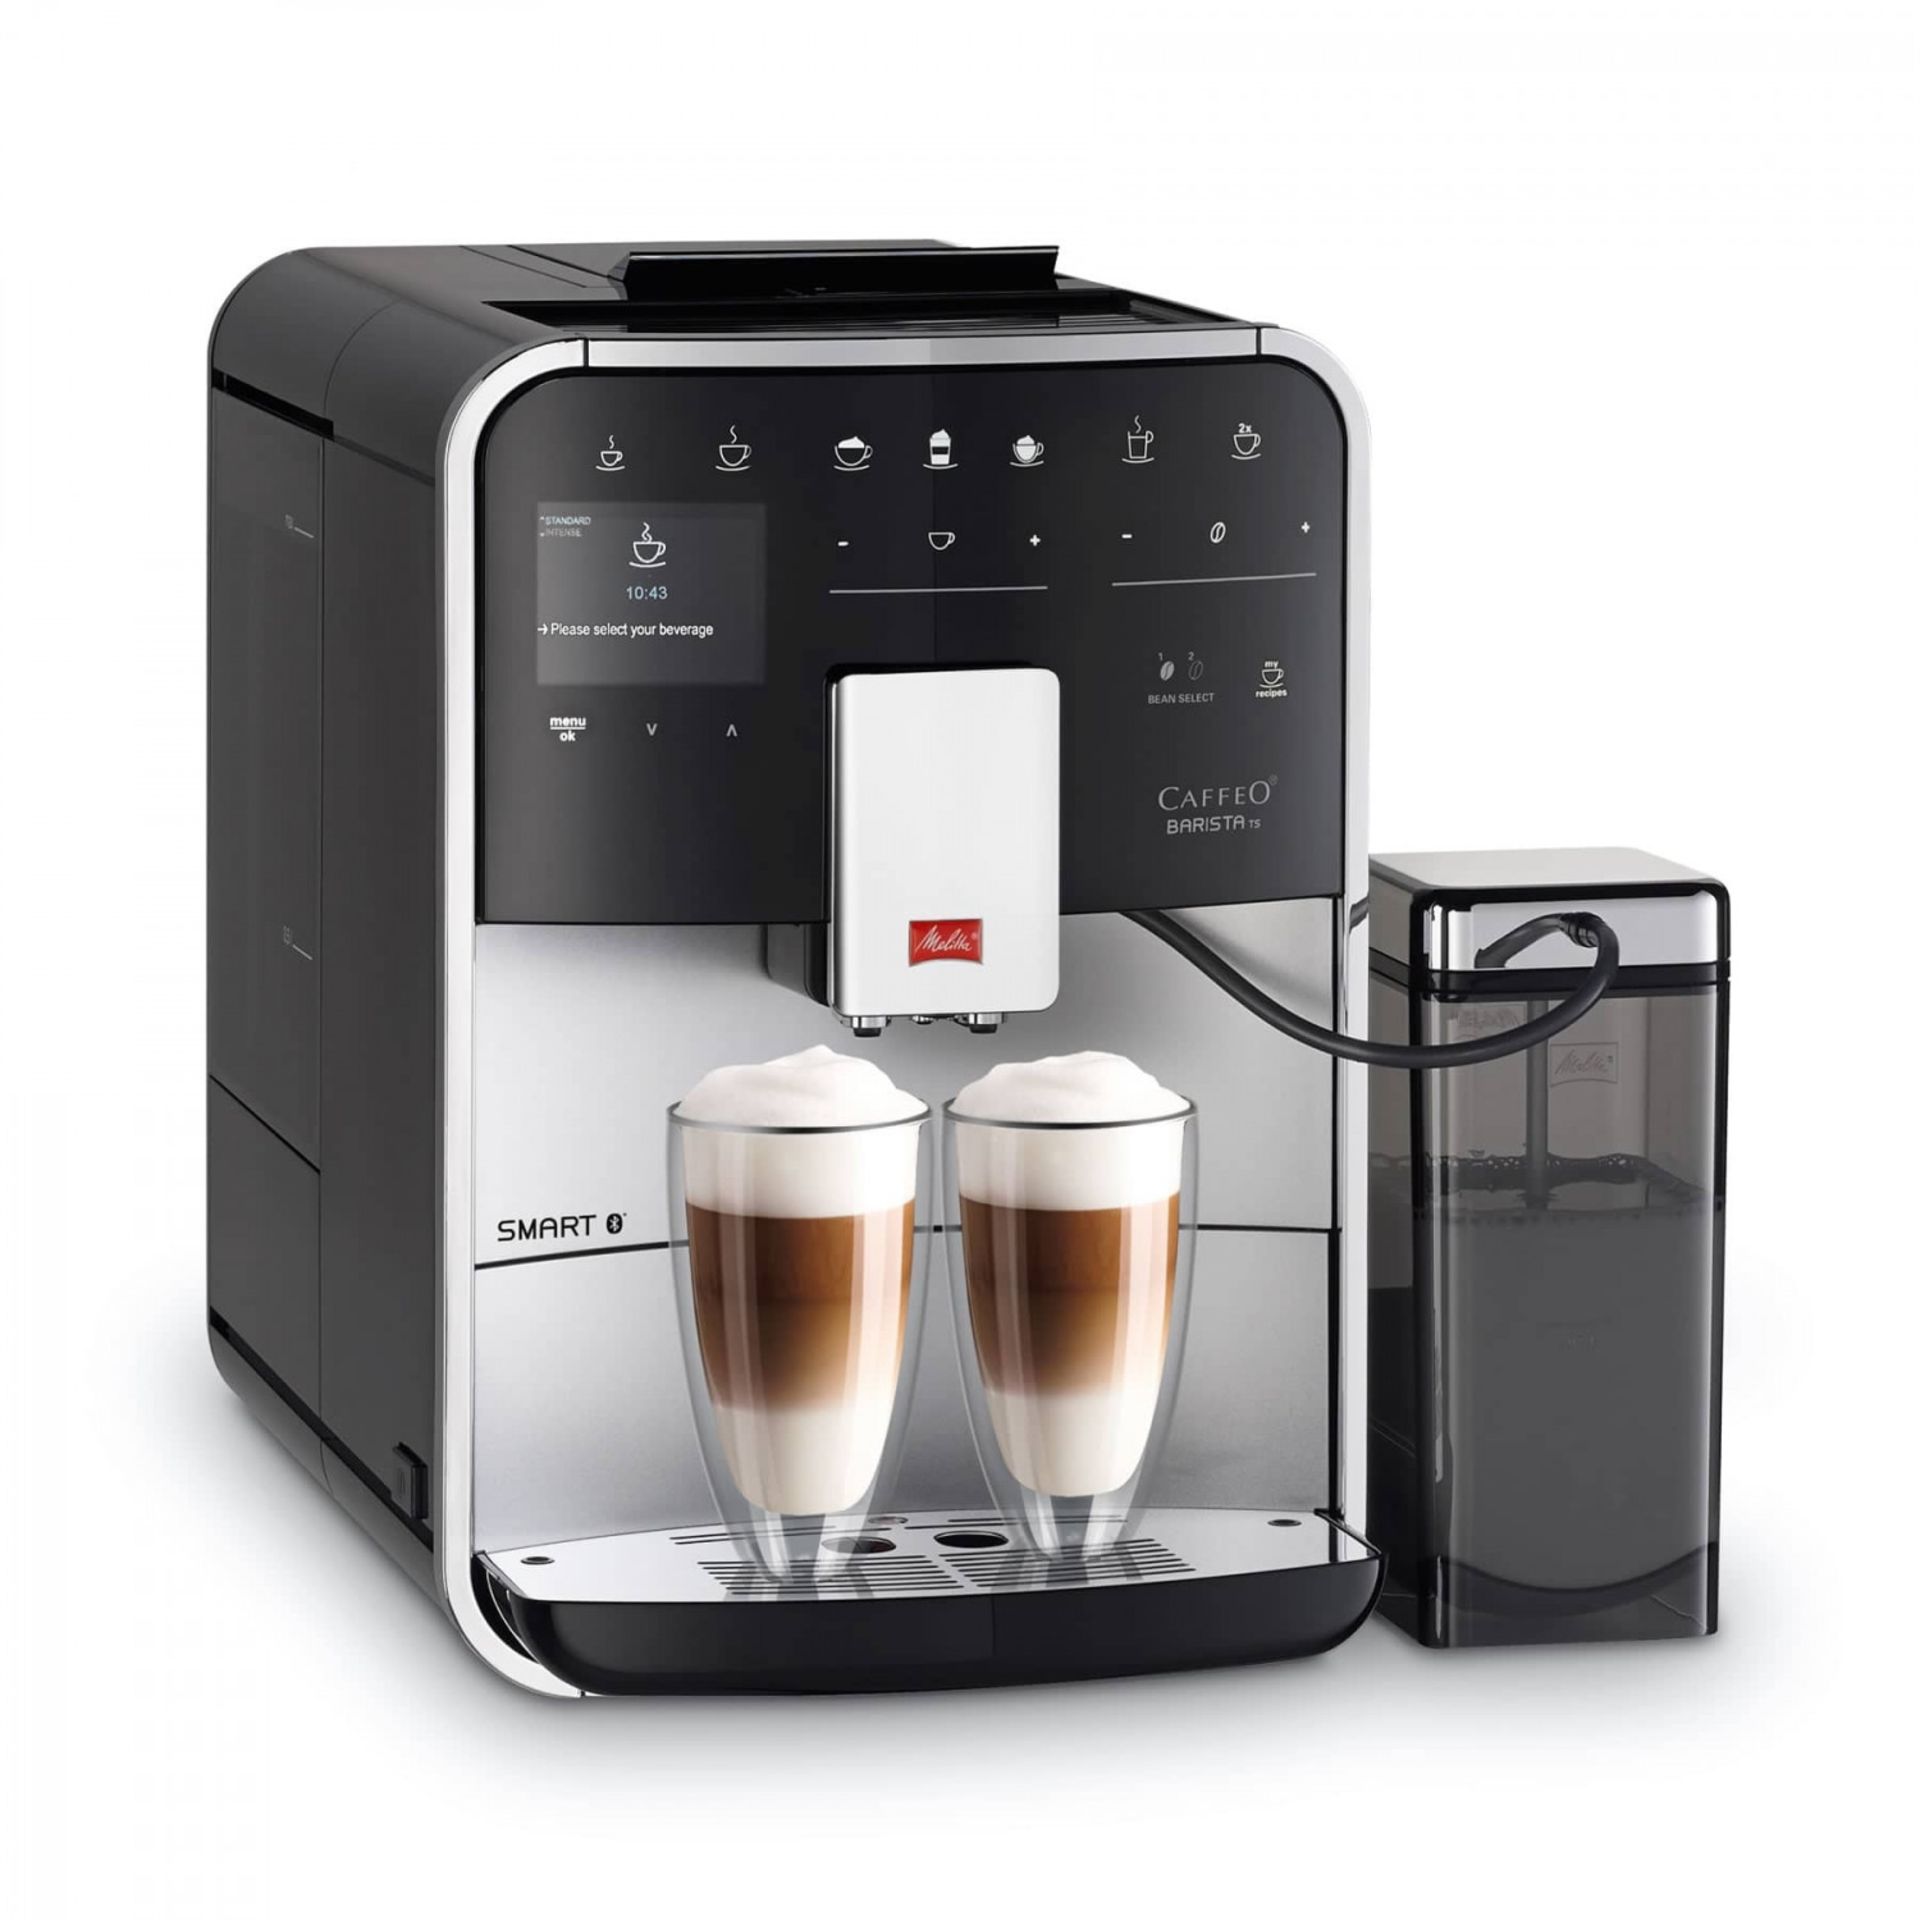 MELITTA BARISTA SMART COFFEE MACHINE RRP £750Condition ReportAppraisal Available on Request - All